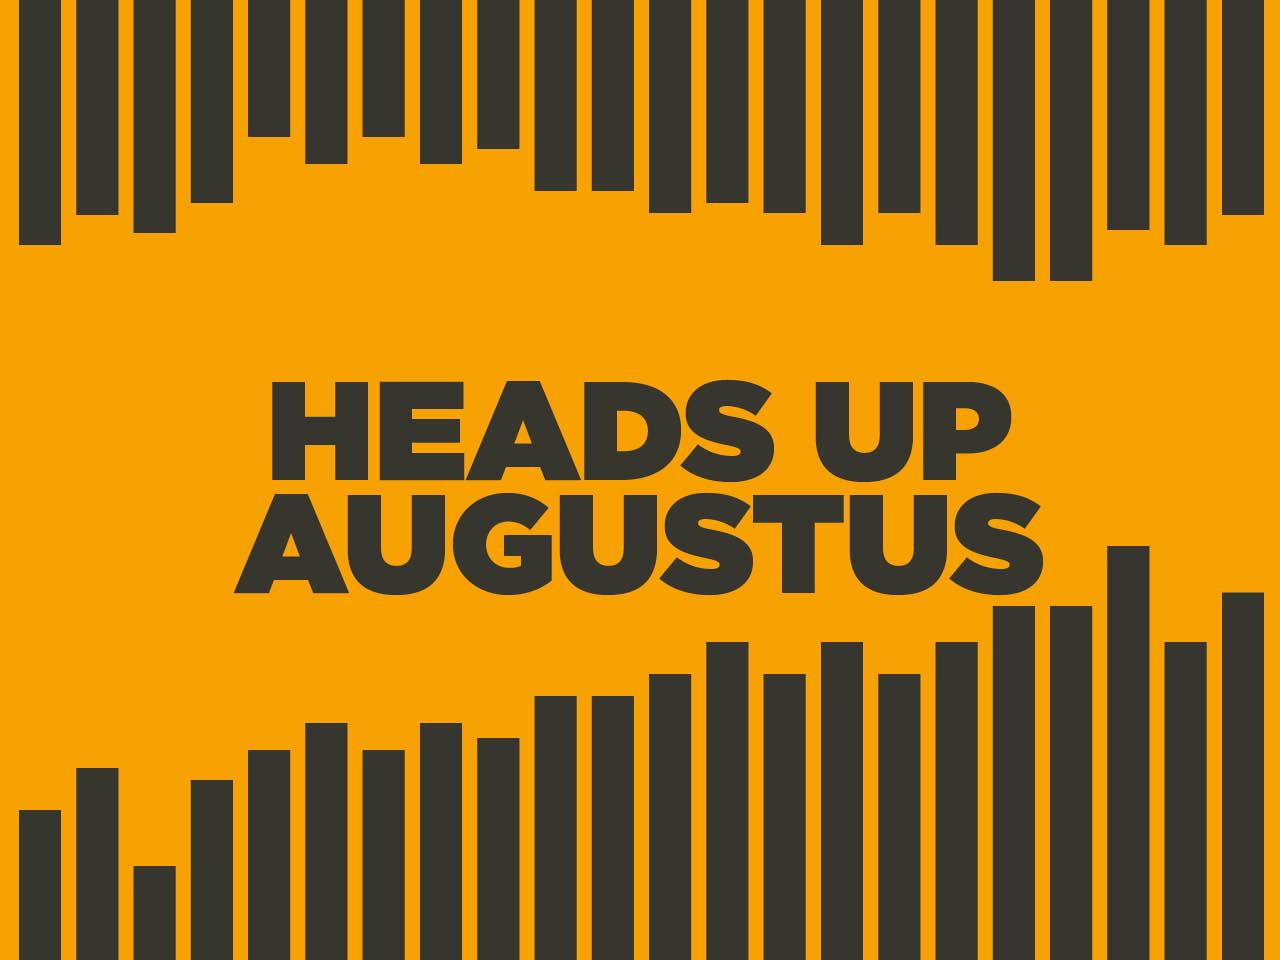 Heads UP AUGUSTUS 2022